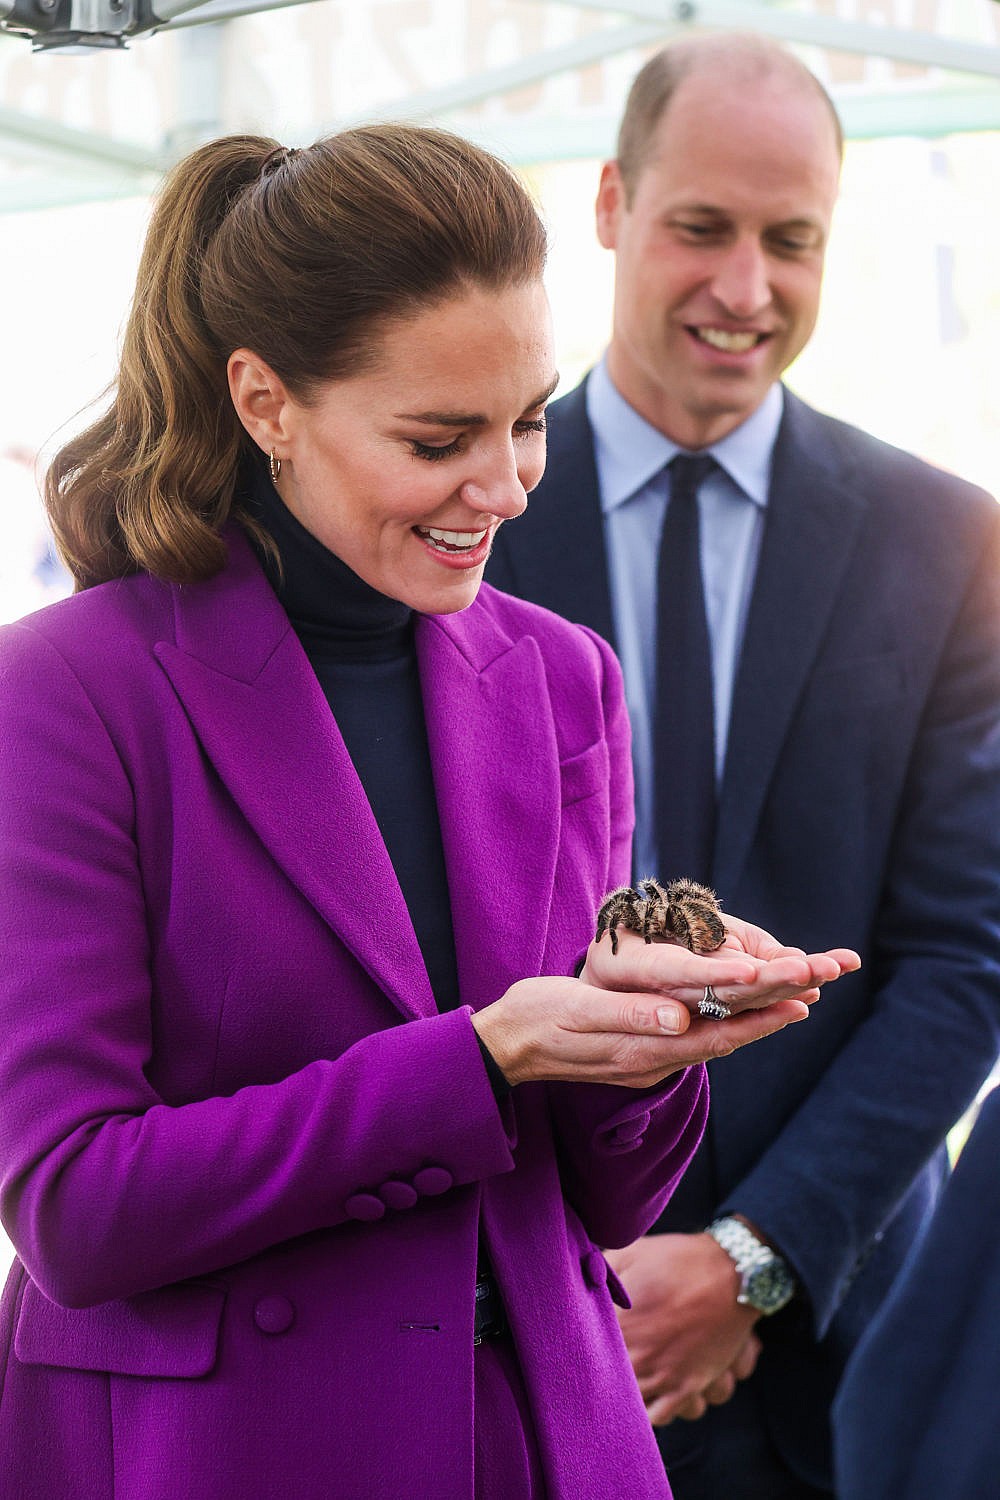 Kate handles a tarantula called Charlotte from Kidz Farm during a tour of the Ulster University Magee Campus on September 29, 2021 in Londonderry, Northern Ireland. (Photo: Pool/Samir Hussein/WireImage)